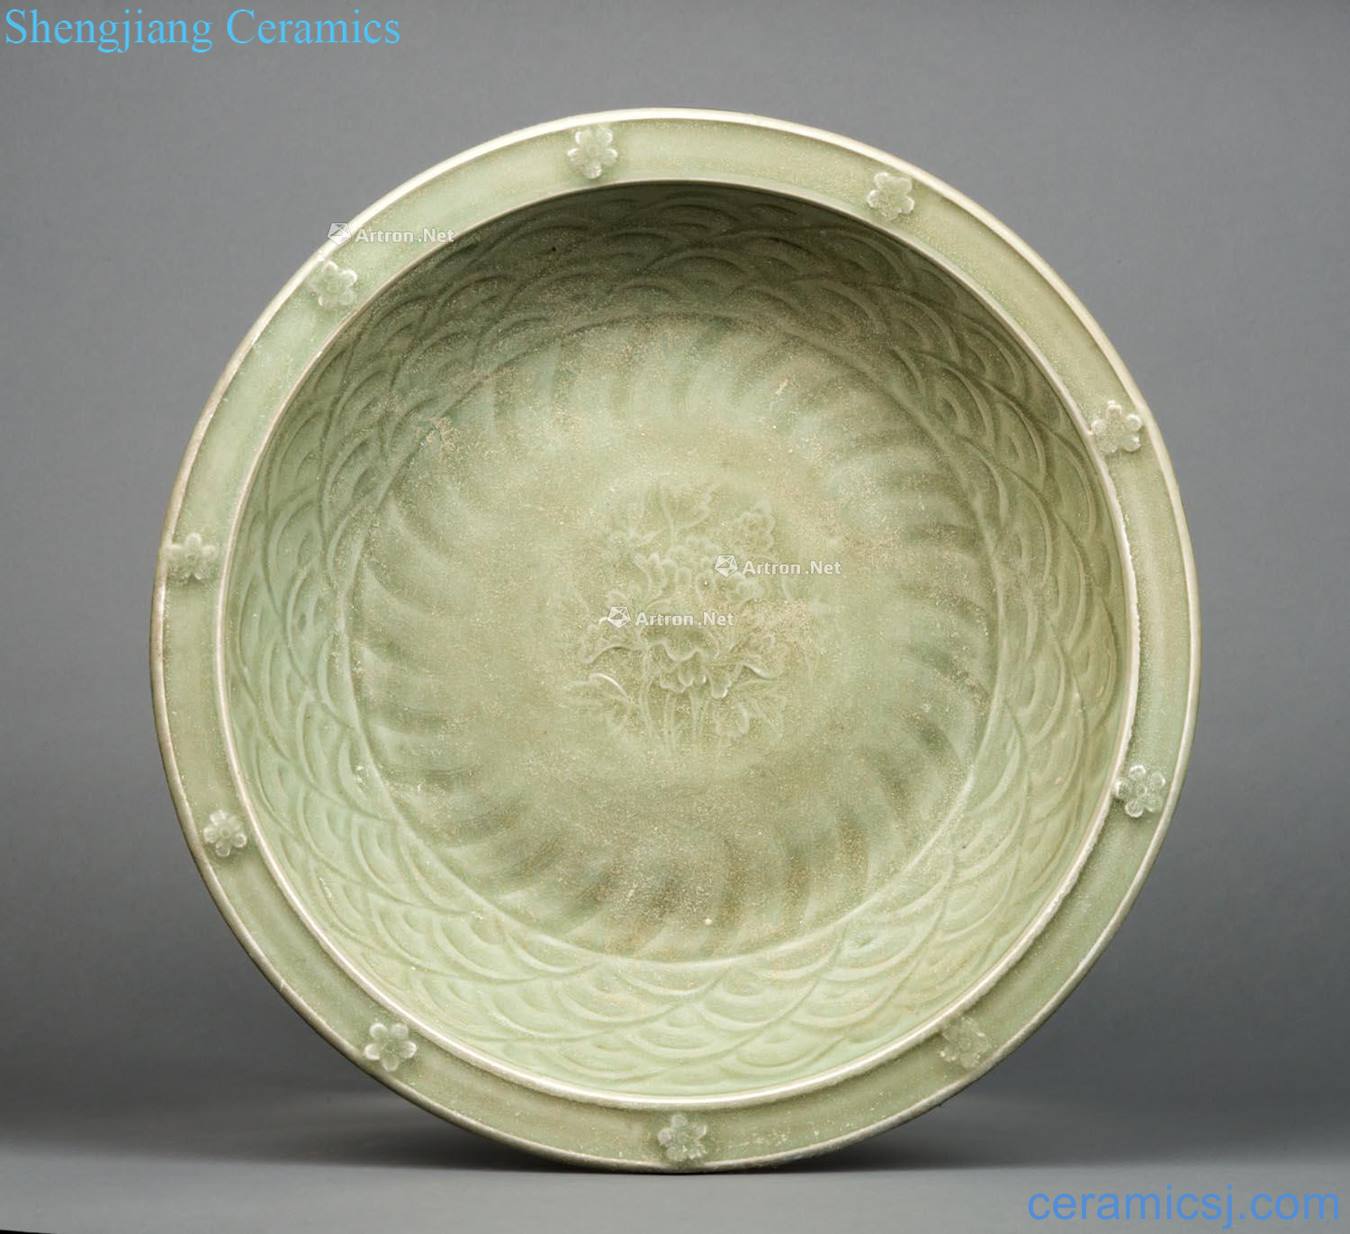 Early 14th century yuan dynasty to the middle Longquan celadon plate